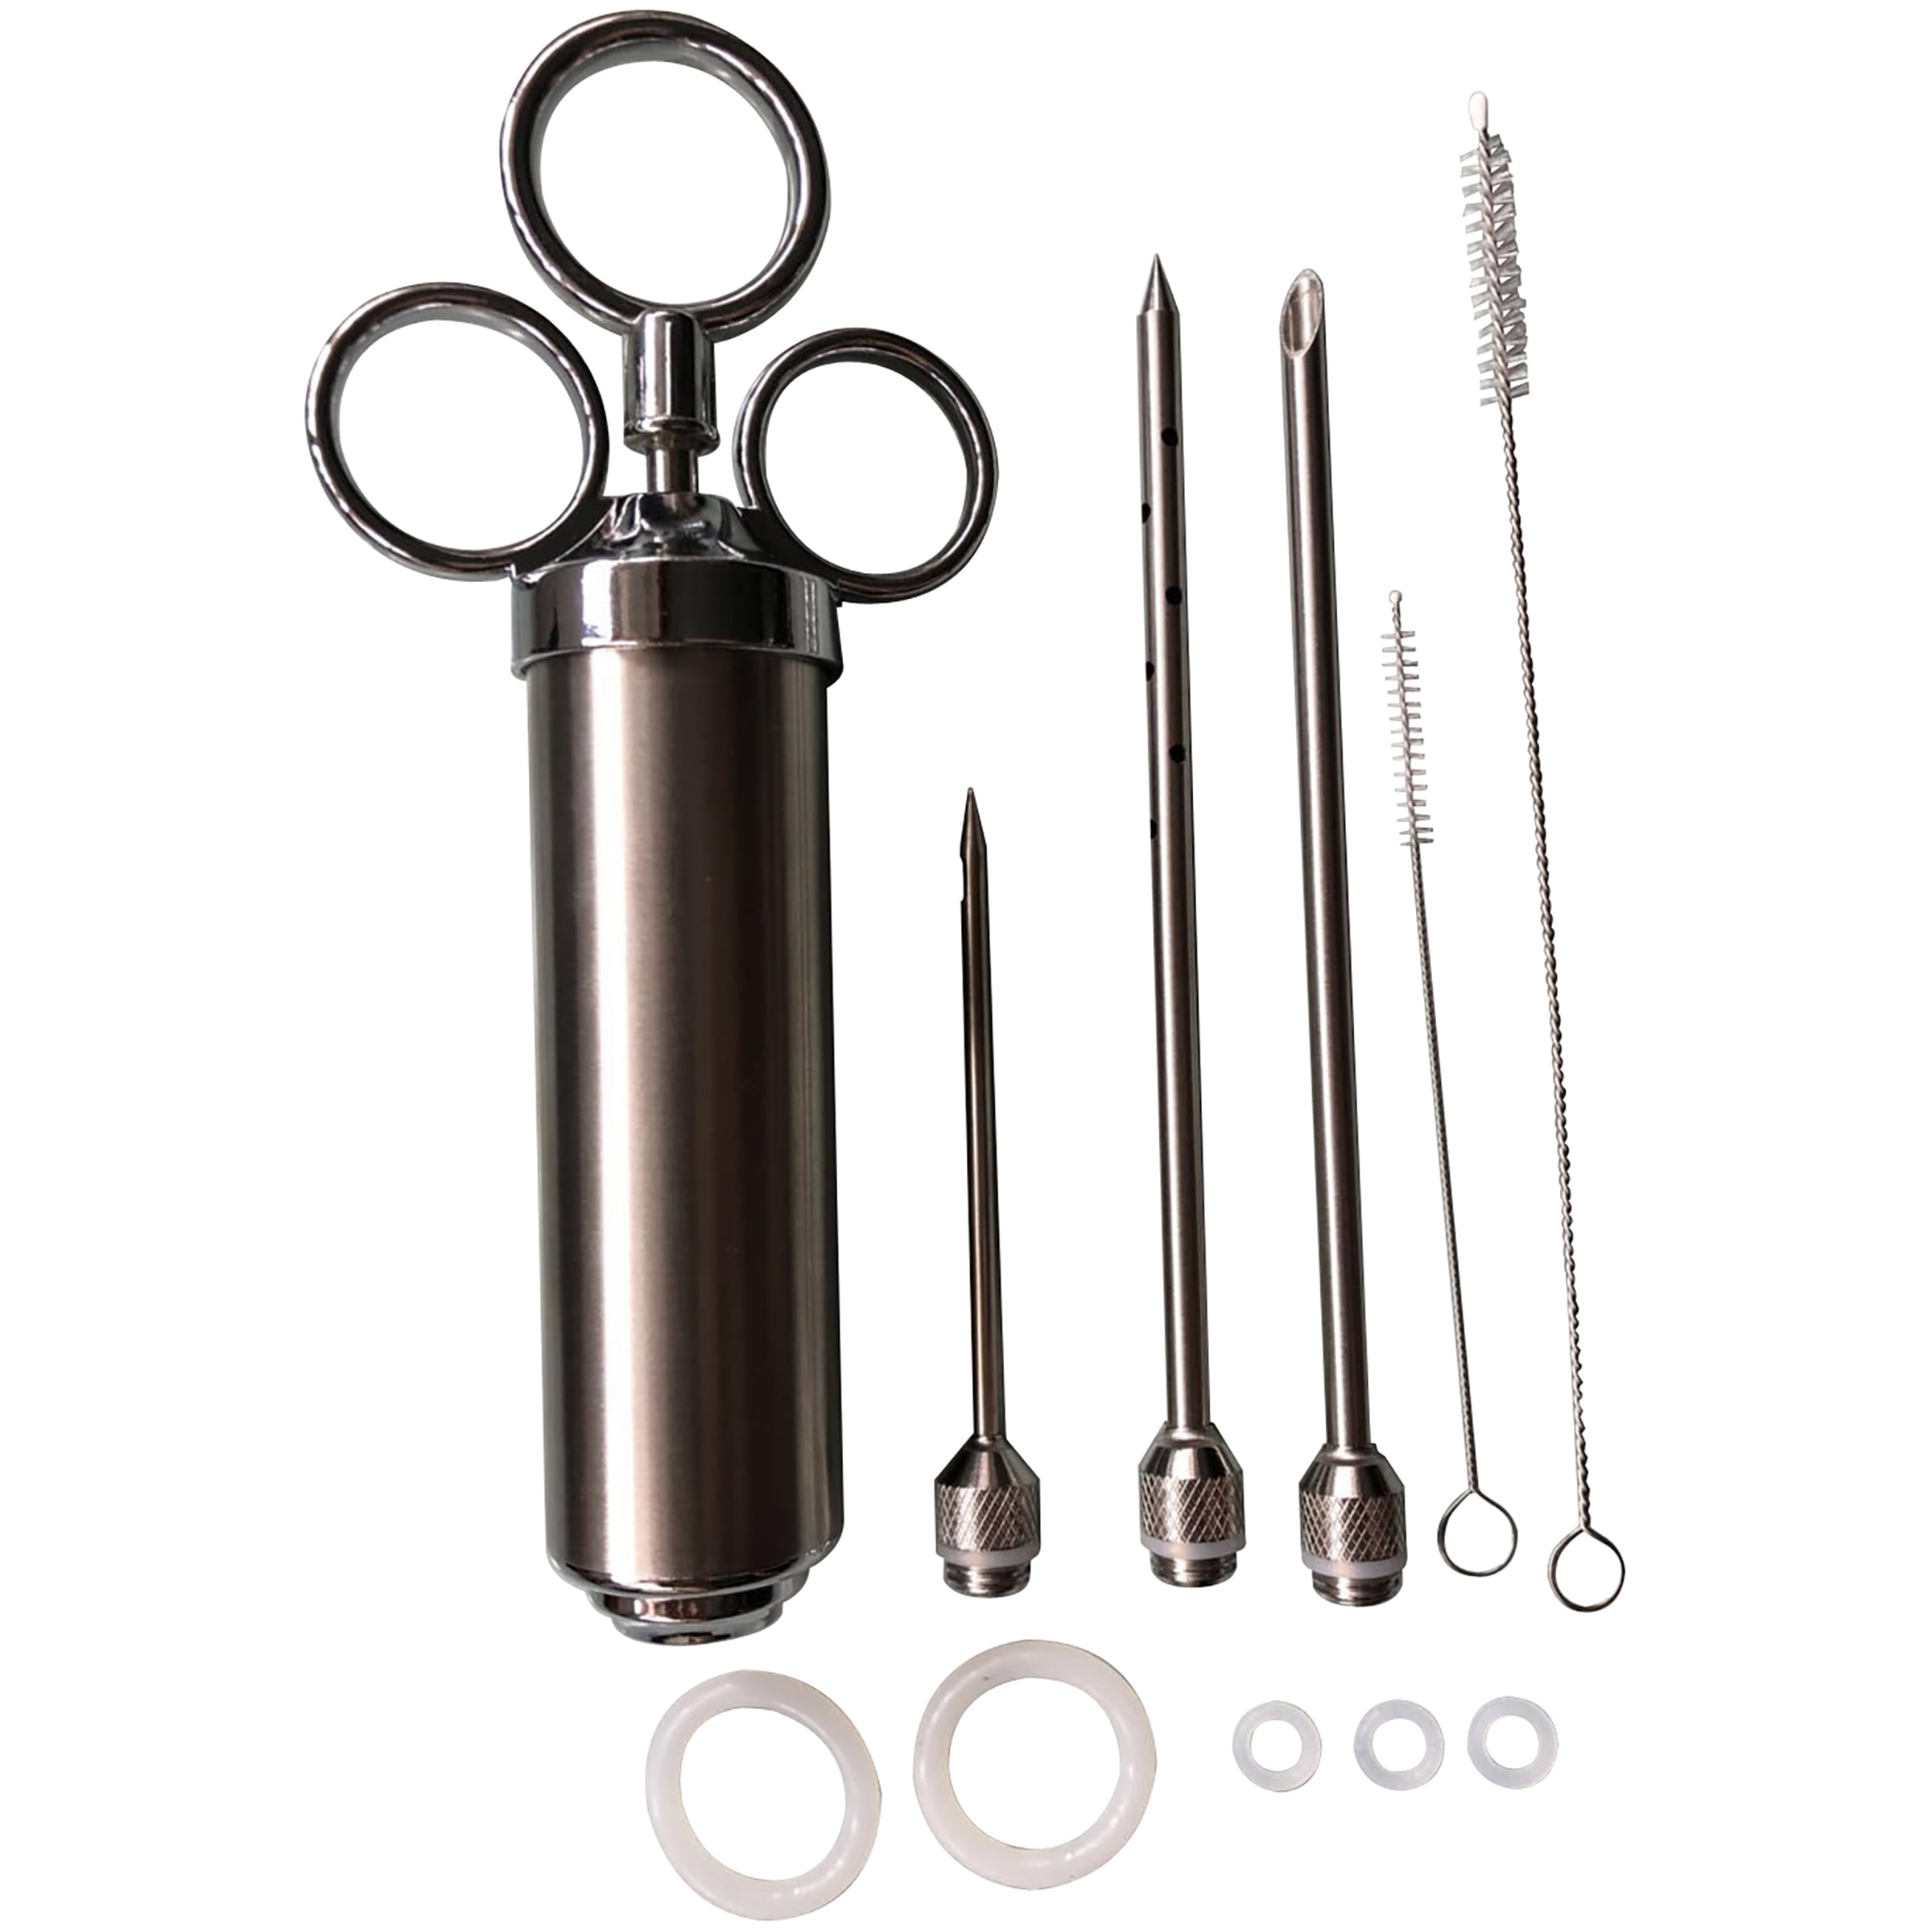 Expert Grill Stainless Steel Marinade Injector Set, 2OZ Capacity, 3 Pieces